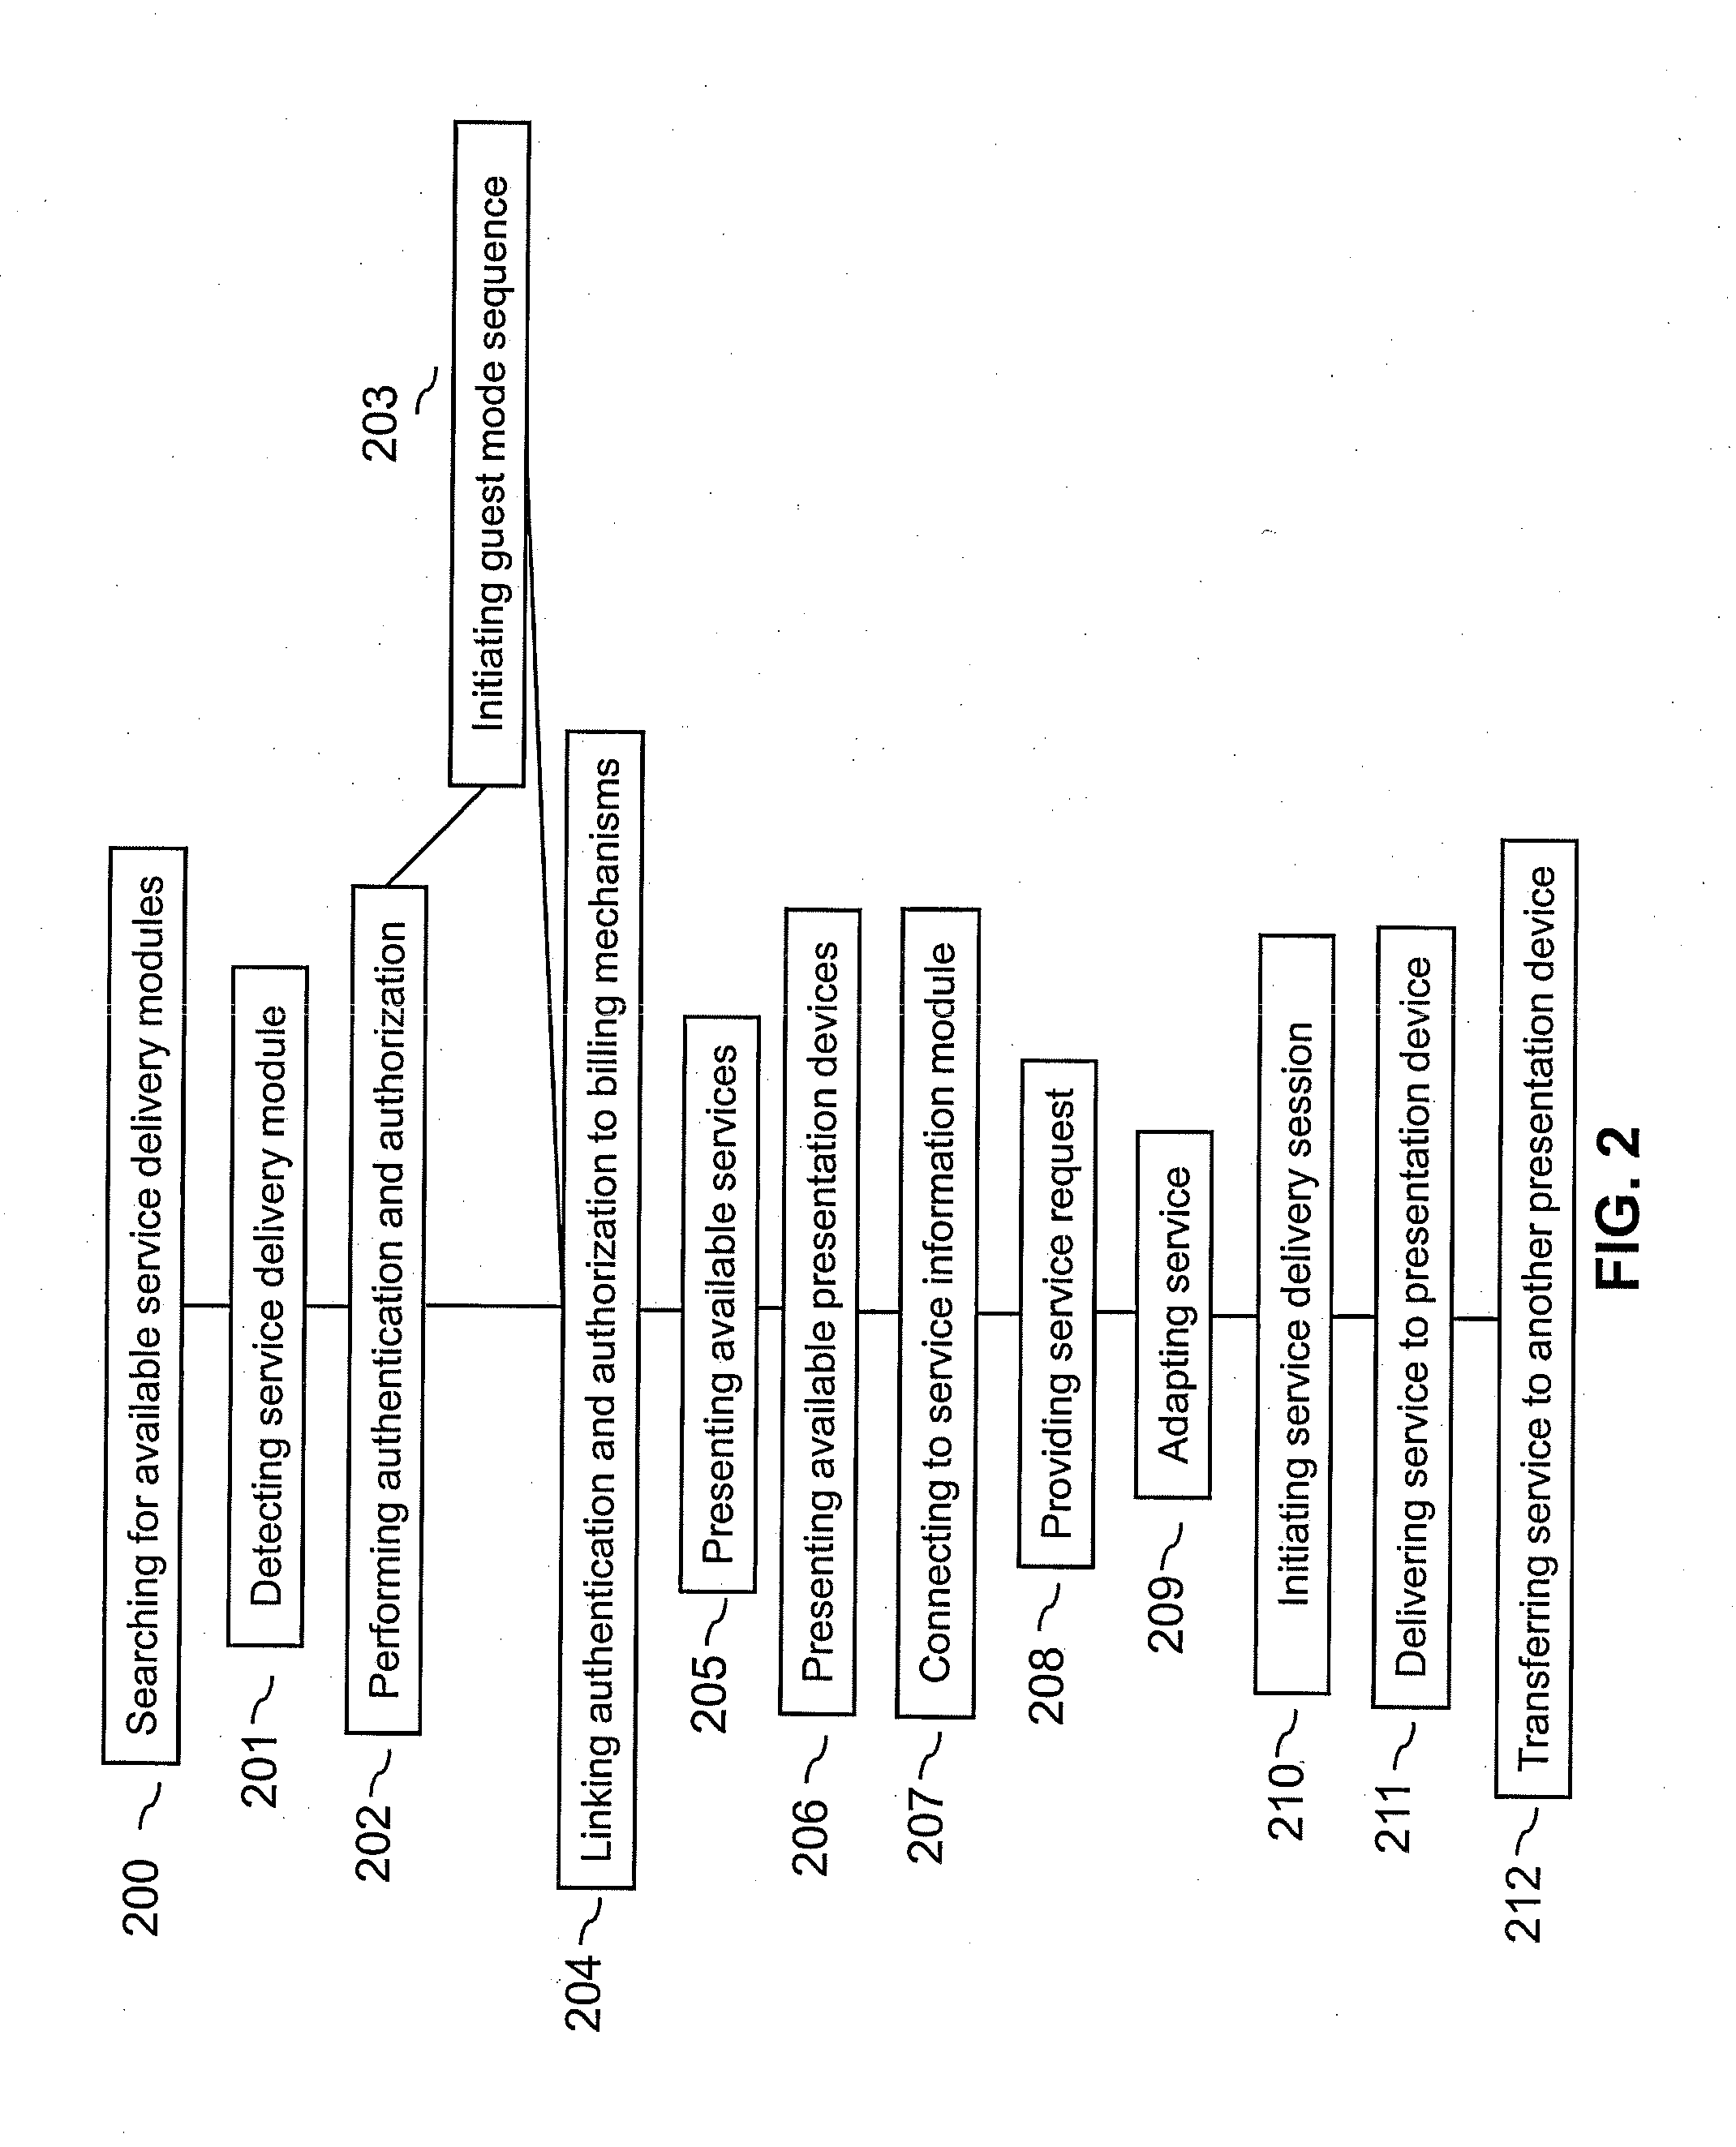 System and method for delegated authentication and authorization